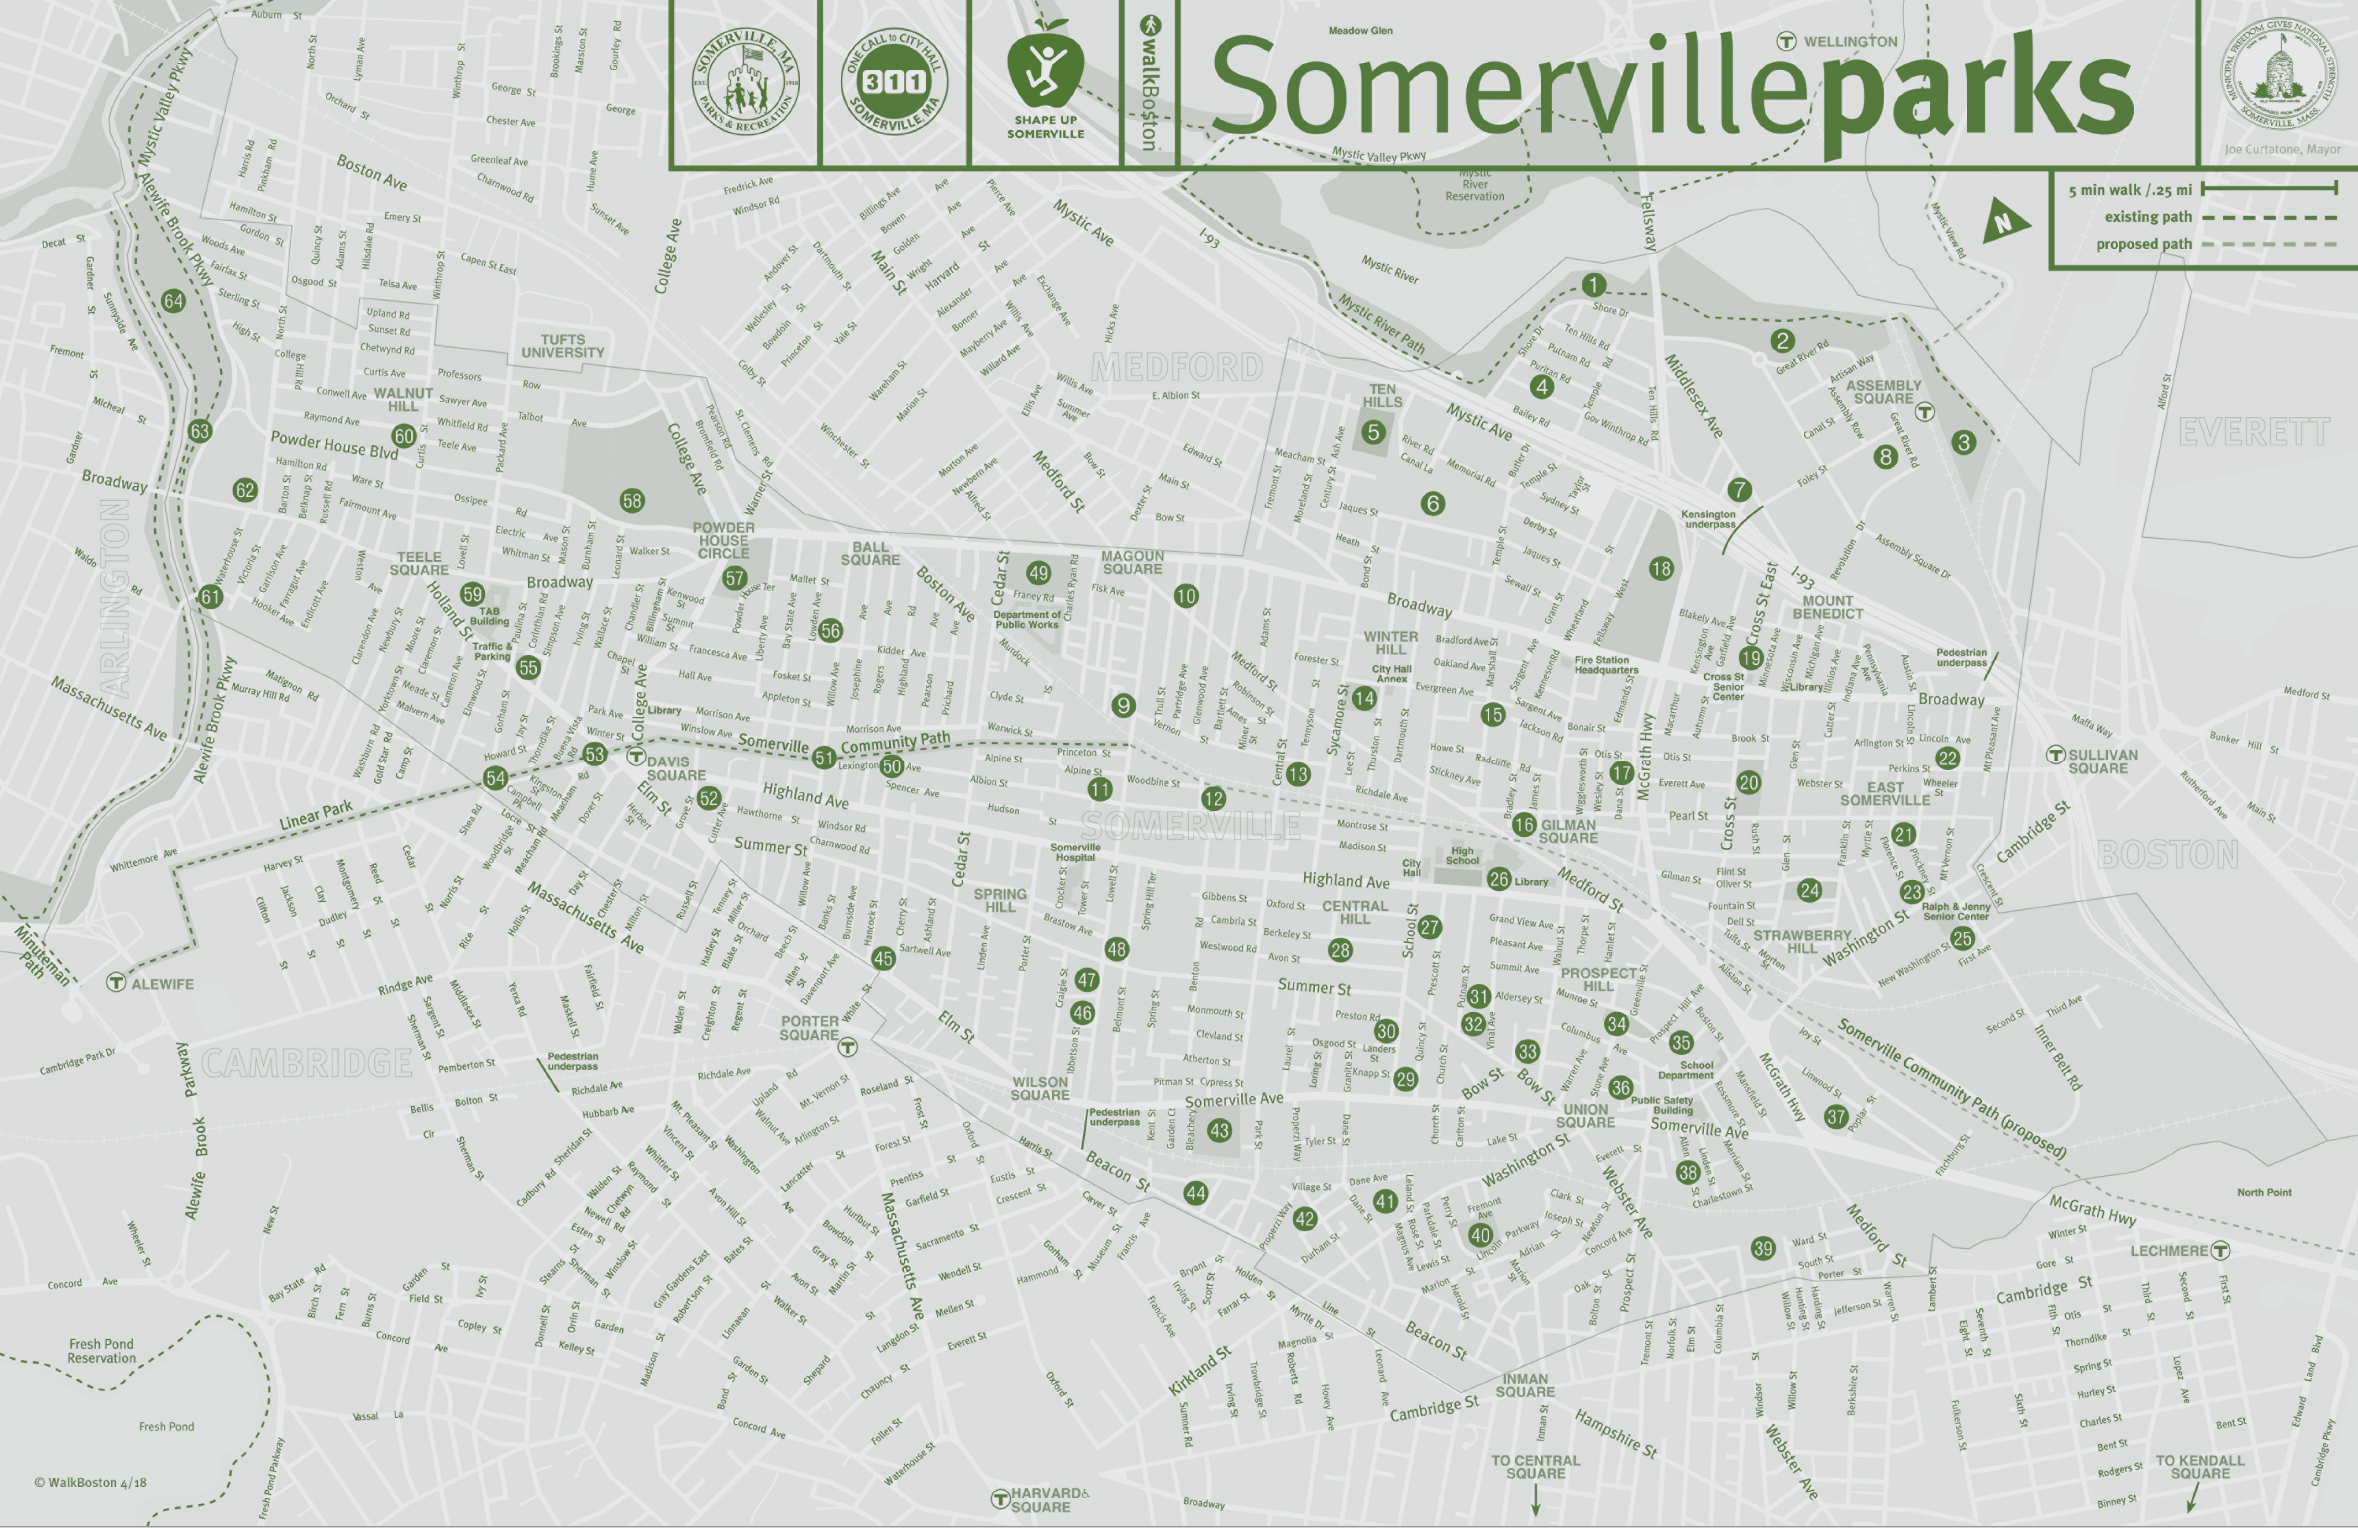 Thumbnail preview links to PDF of Somerville Parks Map